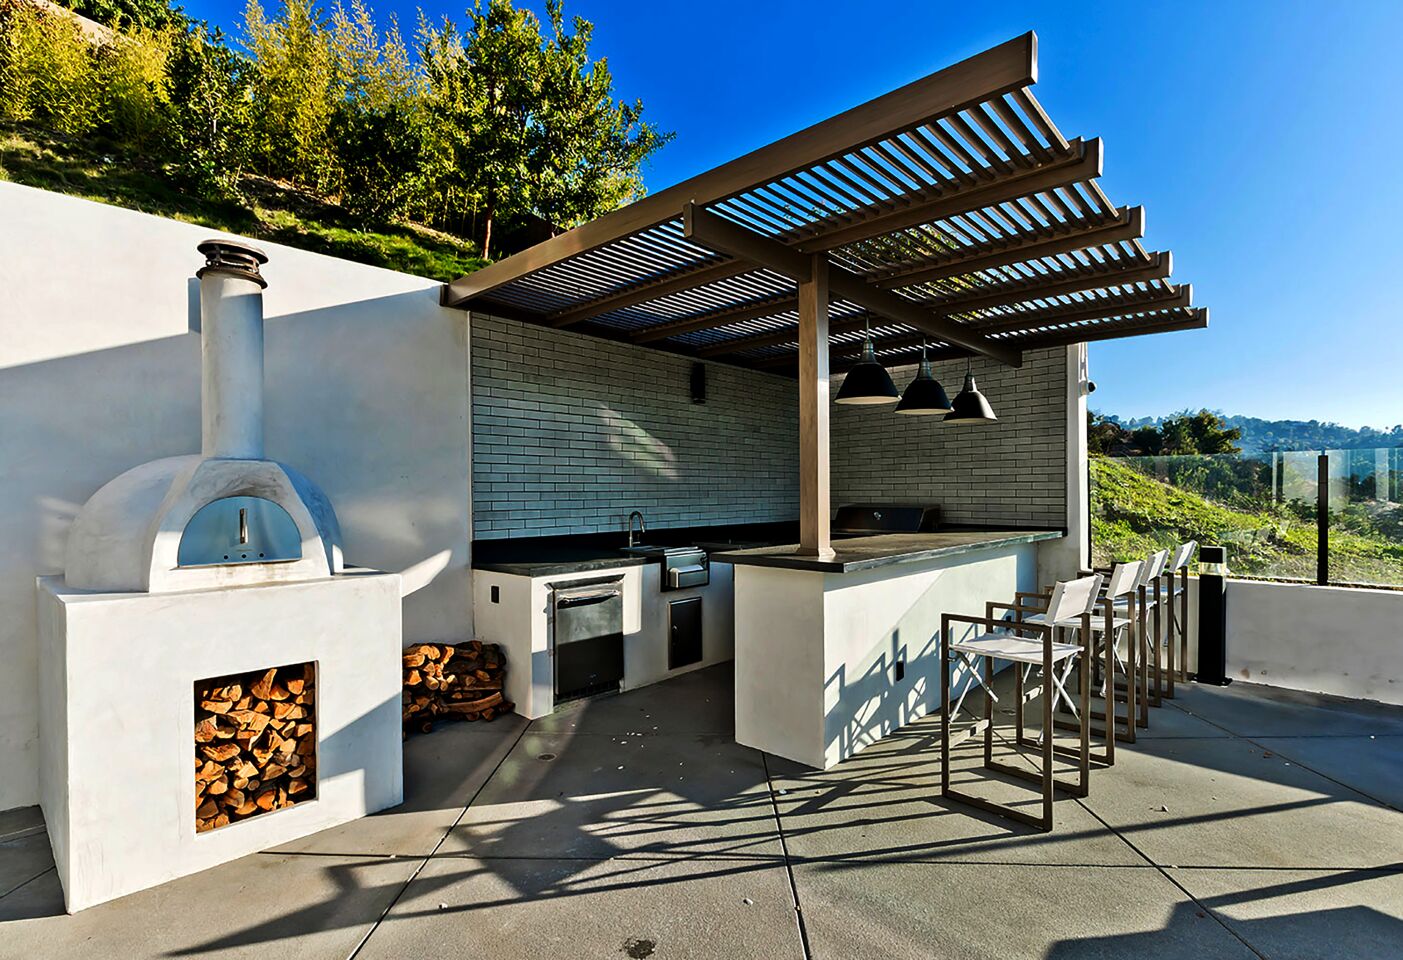 An outdoor kitchen, lounge and fenced play yard make up the grounds.